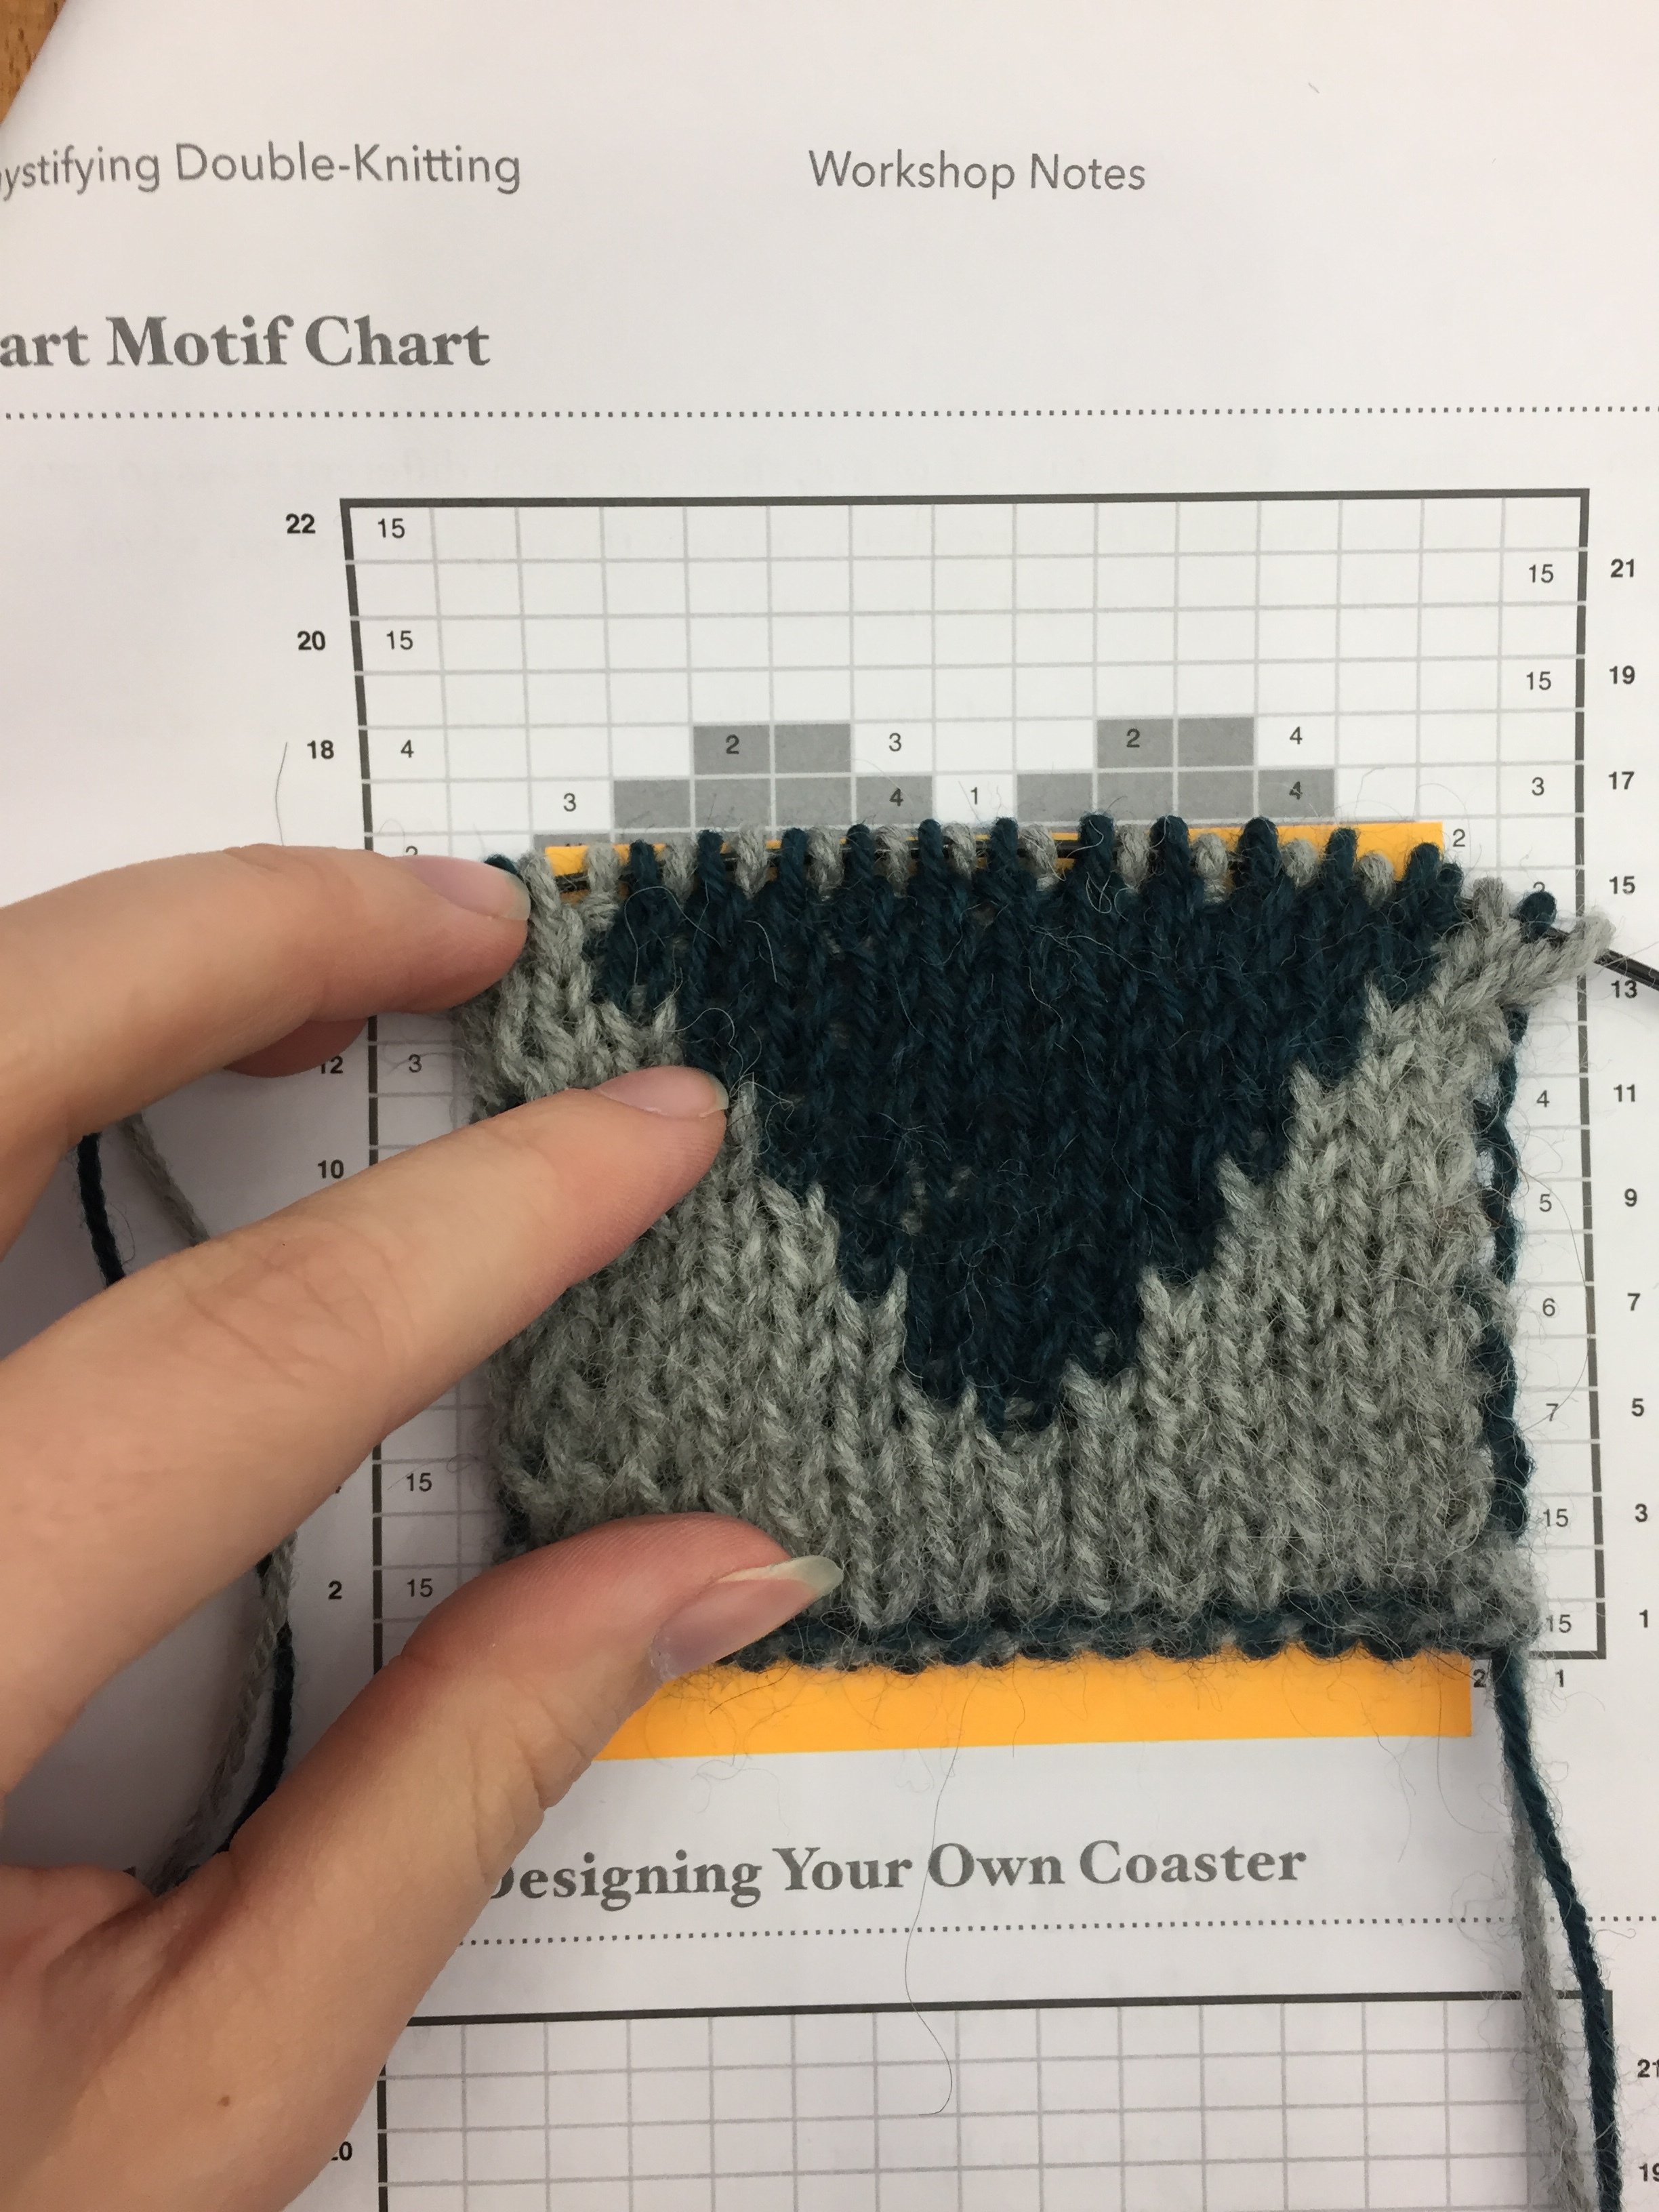 Learning to double knit by knitting a swatch with a heart motif.